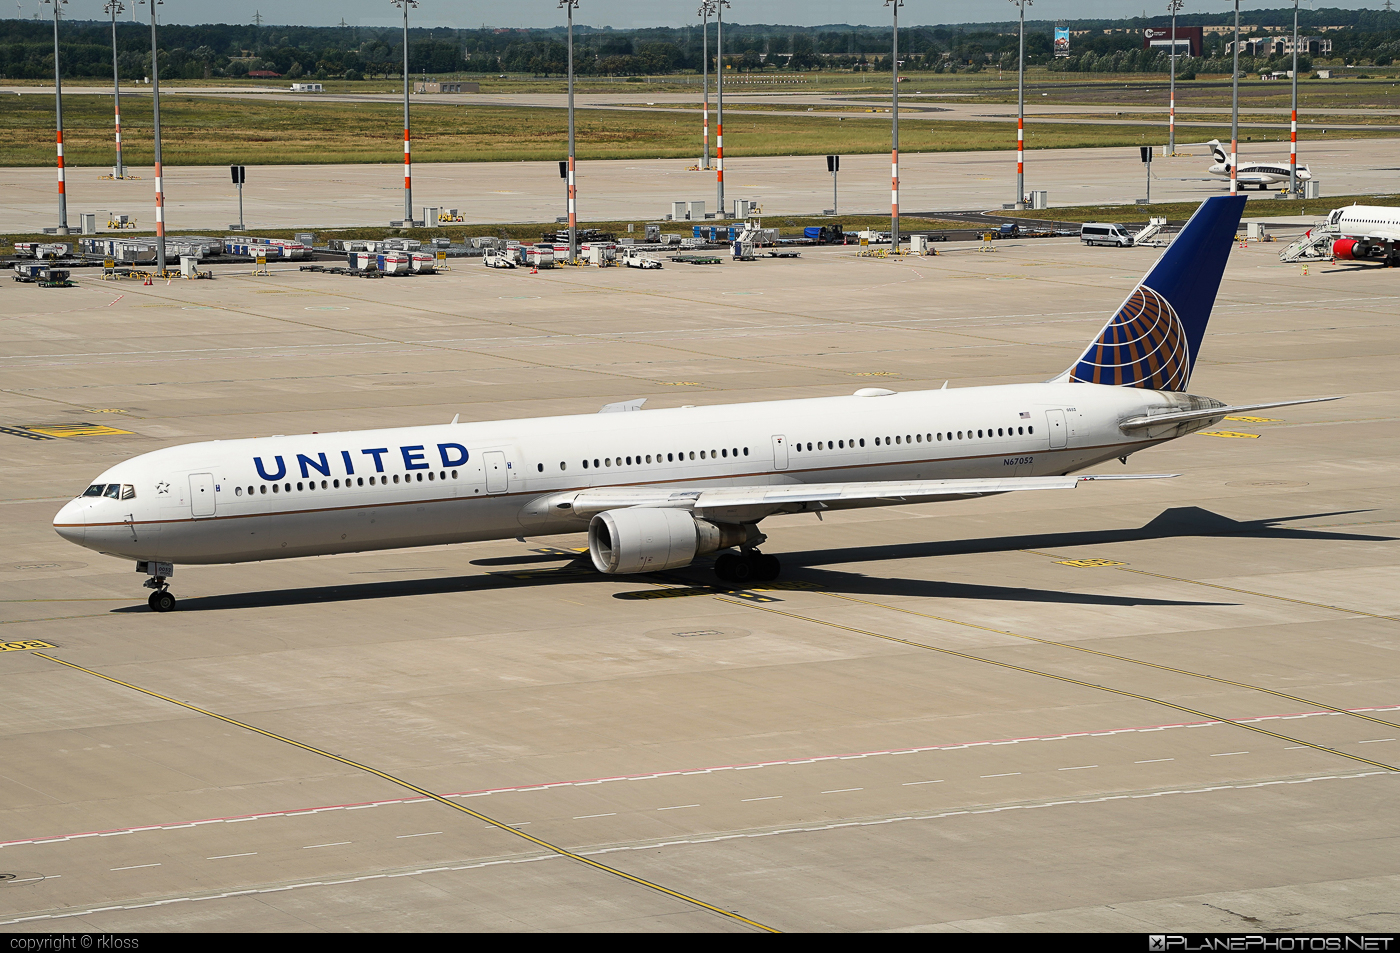 Boeing 767-400ER - N67052 operated by United Airlines #b767 #b767er #boeing #boeing767 #unitedairlines